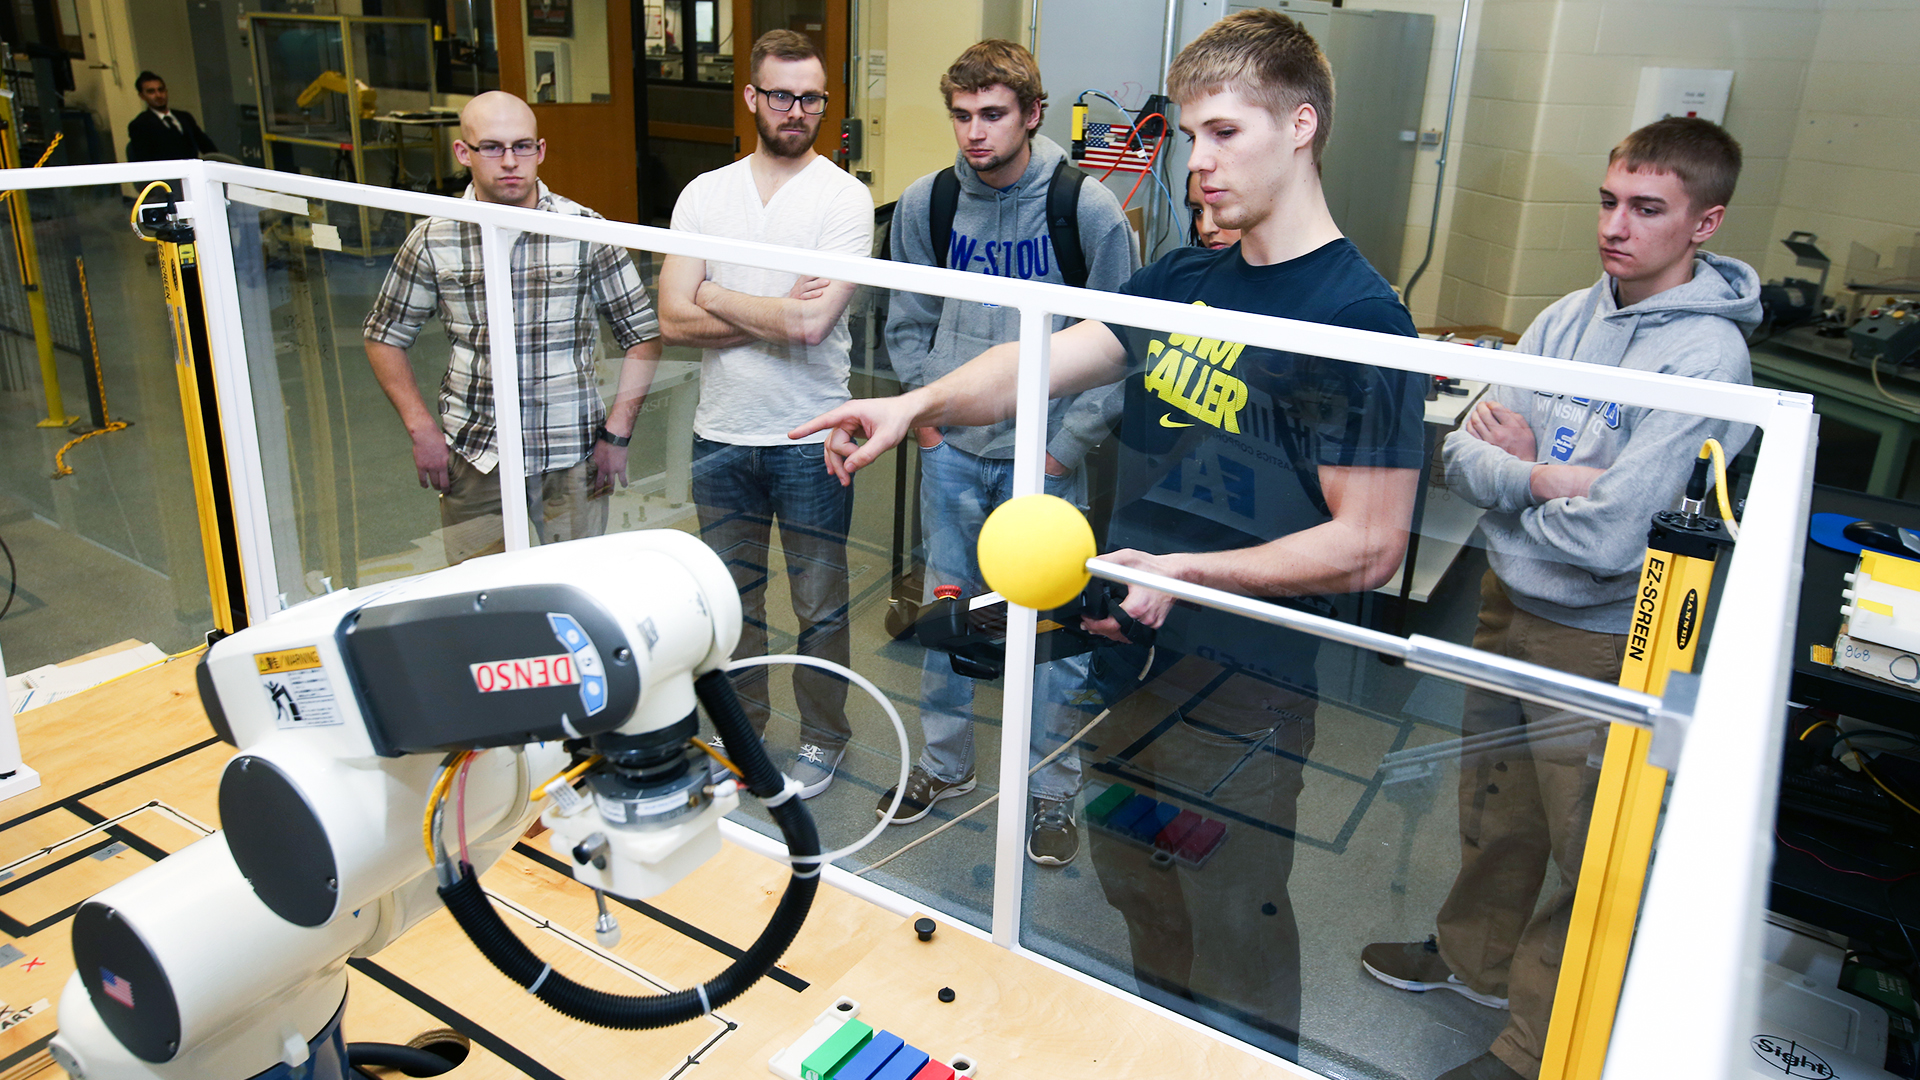 Student watch demonstration in the robotics lab at UW-Stout